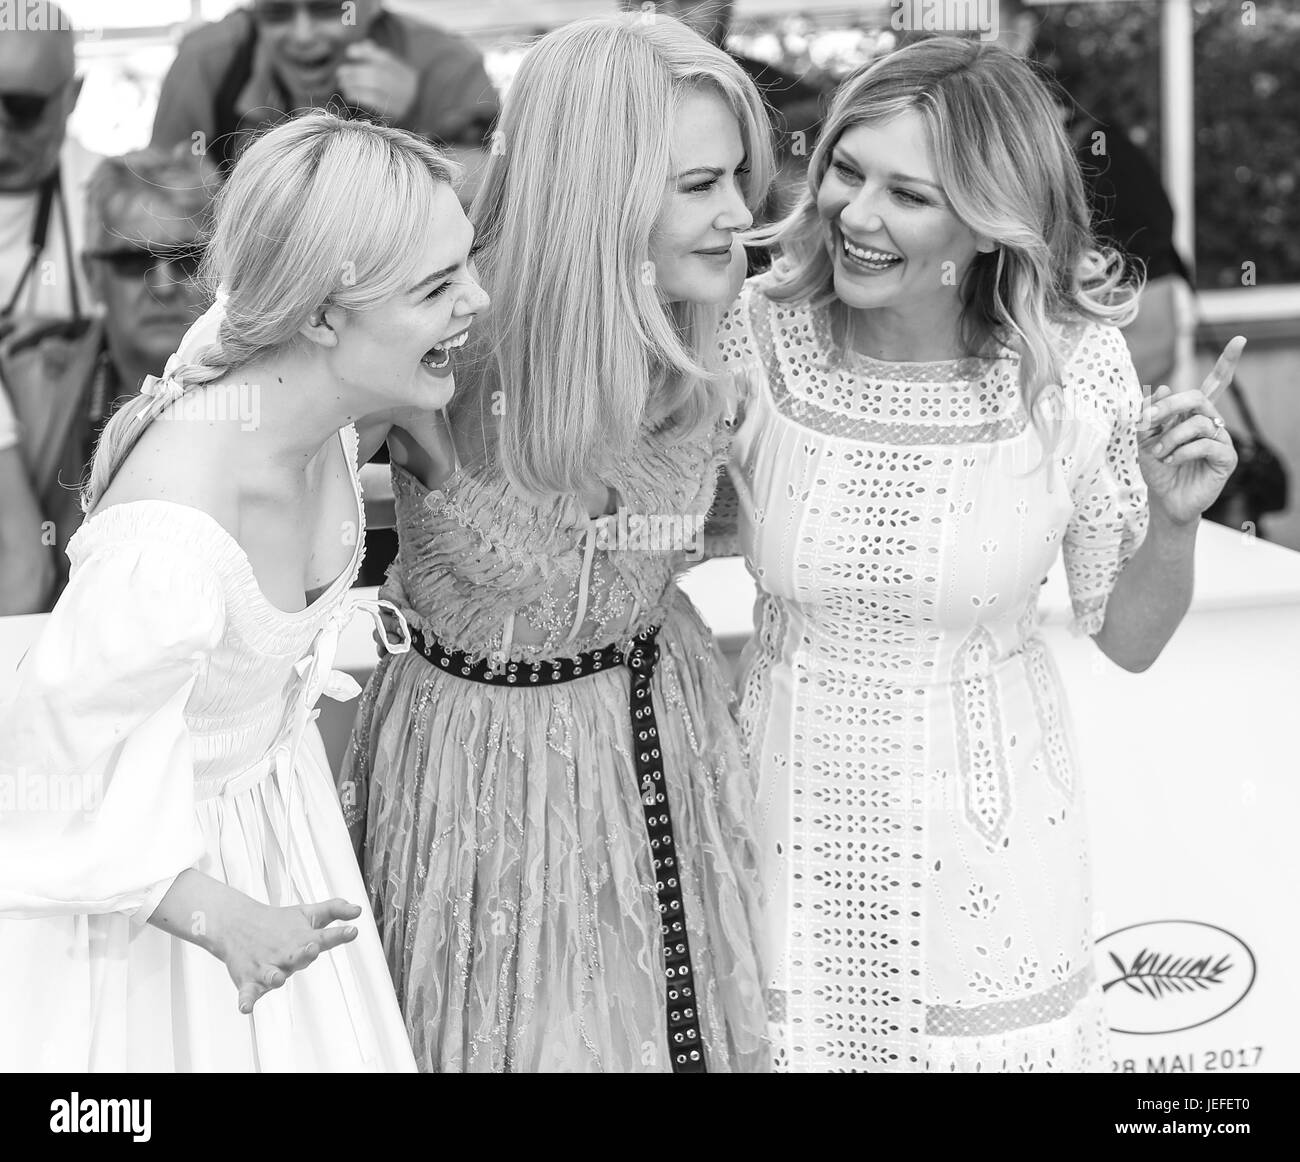 70th Cannes Film Festival - 'The Beguiled' - Photocall  Featuring: Elle Fanning, Nicole Kidman, Kirsten Dunst Where: Cannes, France When: 24 May 2017 Credit: John Rainford/WENN.com Stock Photo